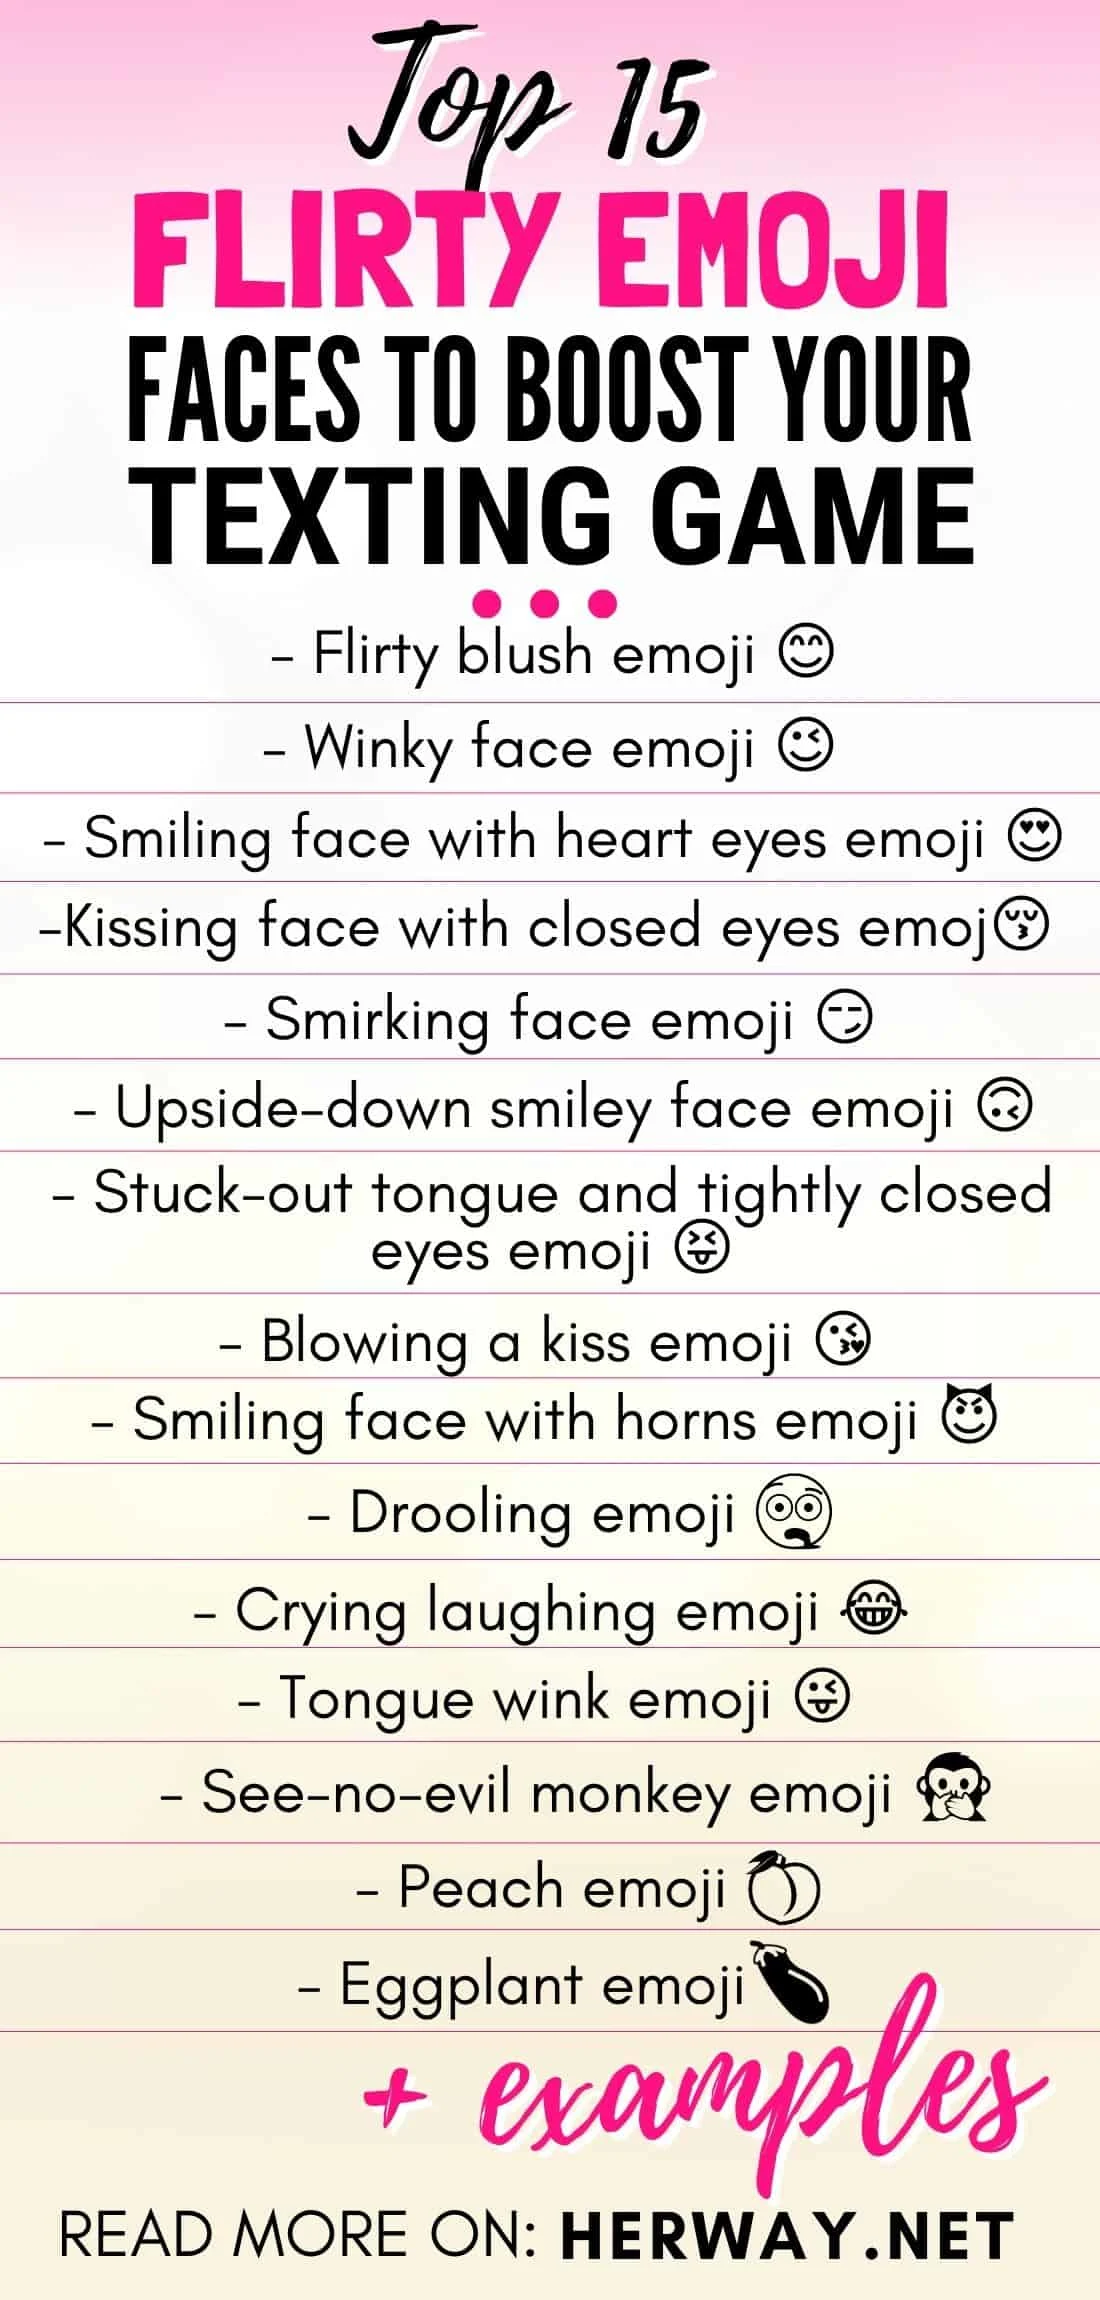 Face the smiley what blushing mean does The Top